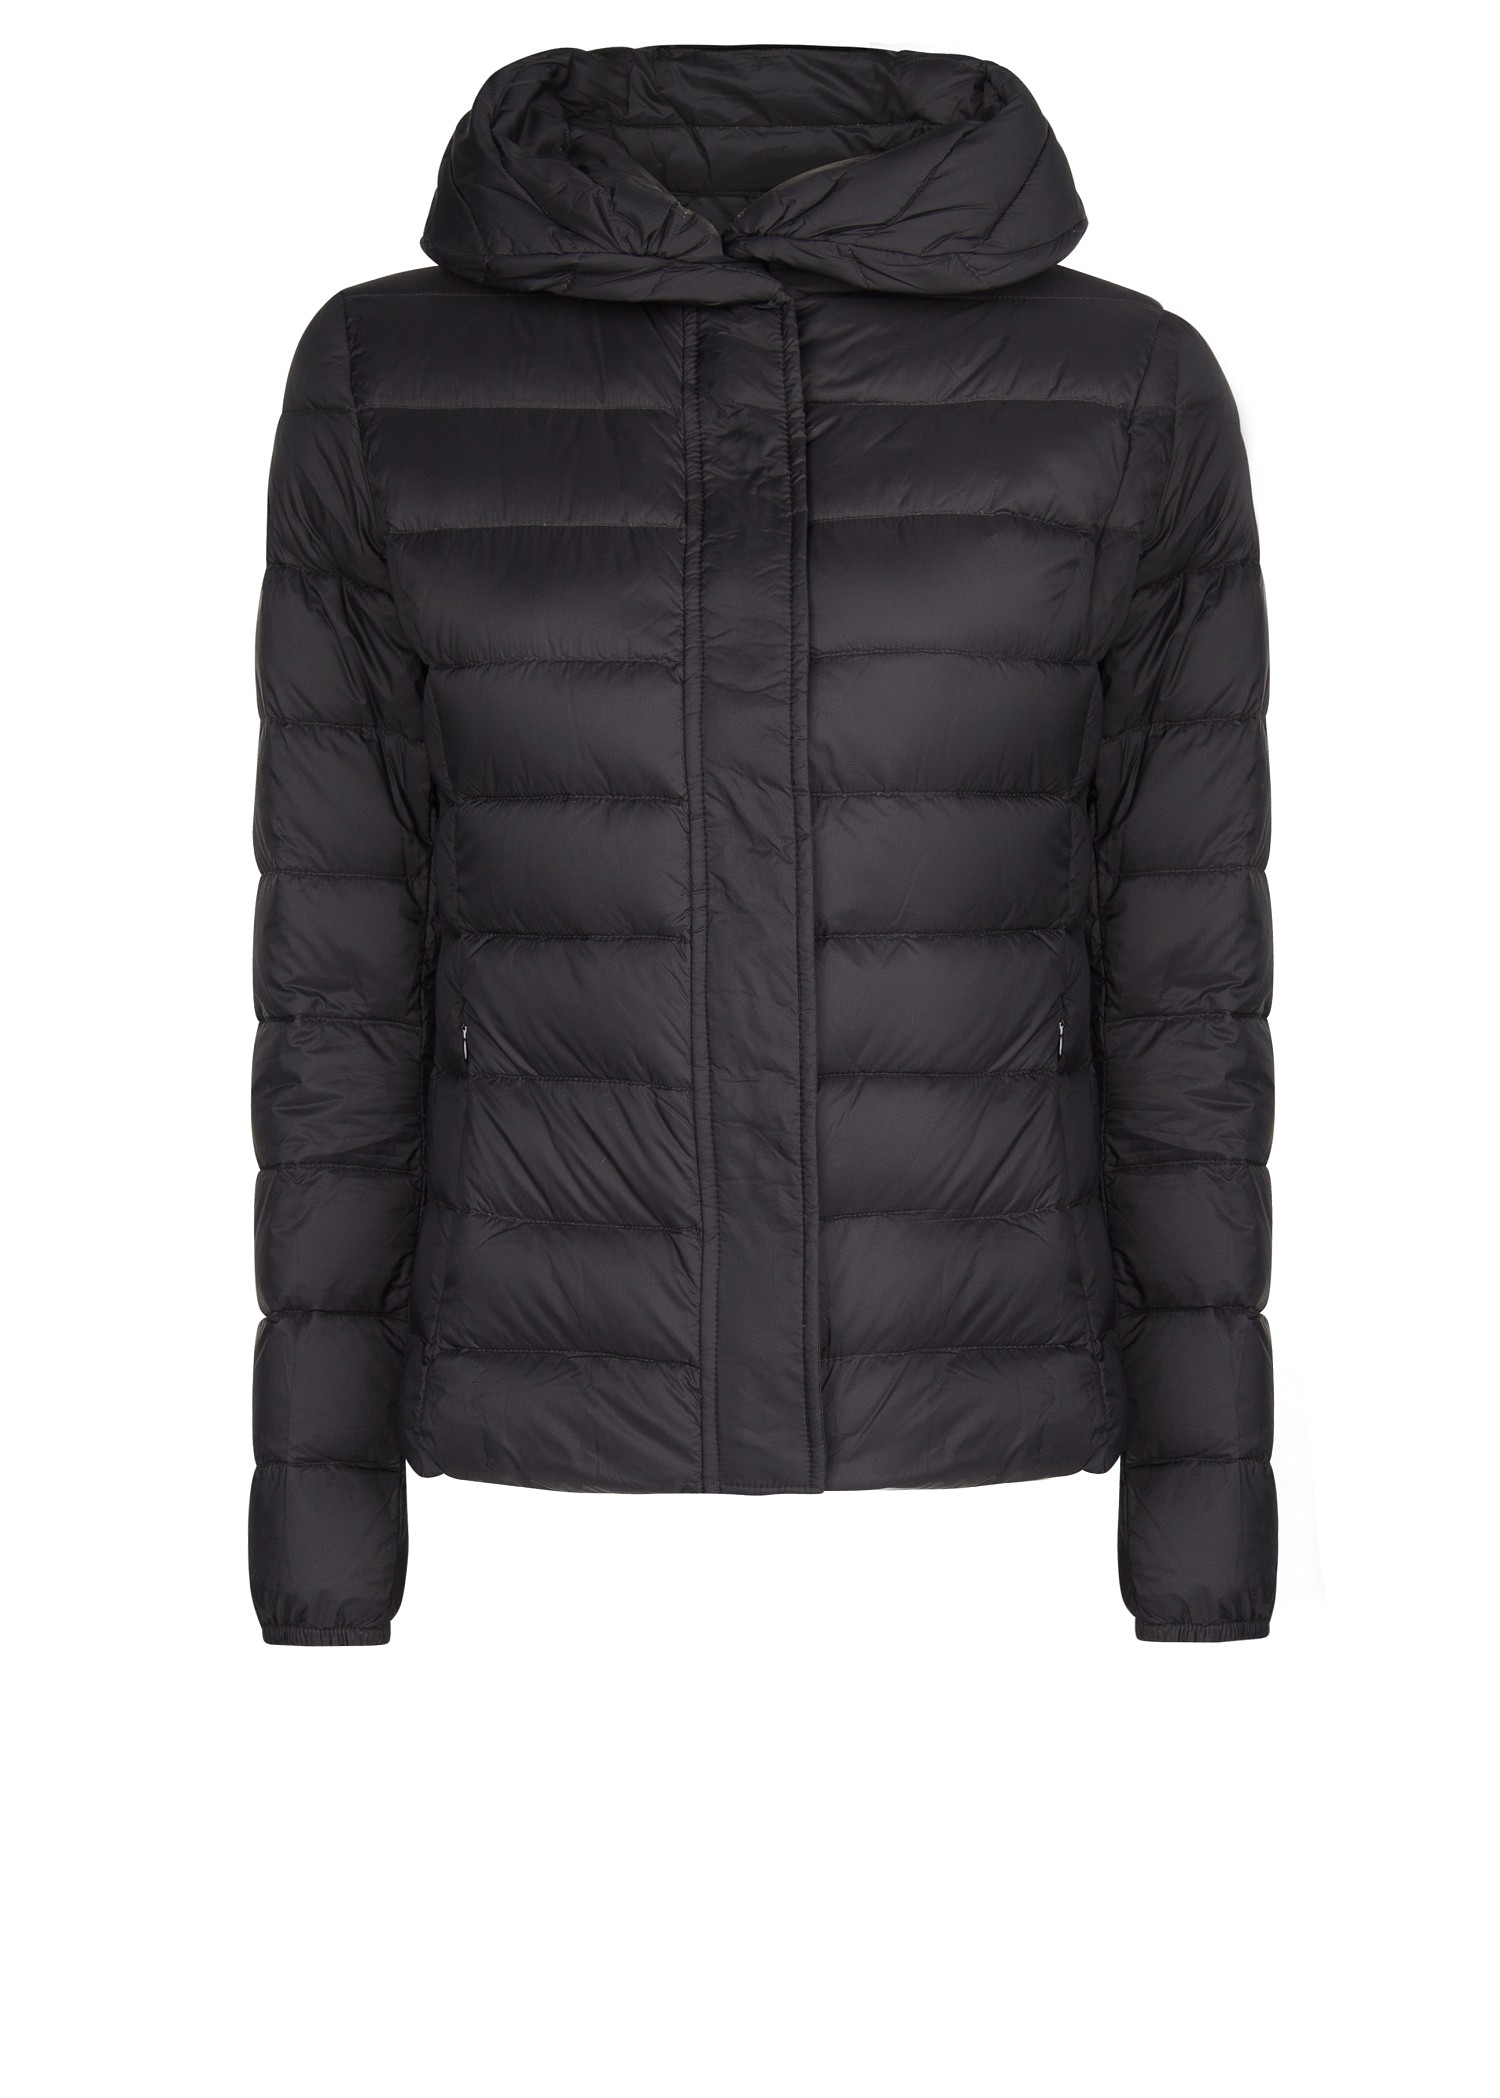 Lyst - Mango Foldable Down Feather Coat in Black